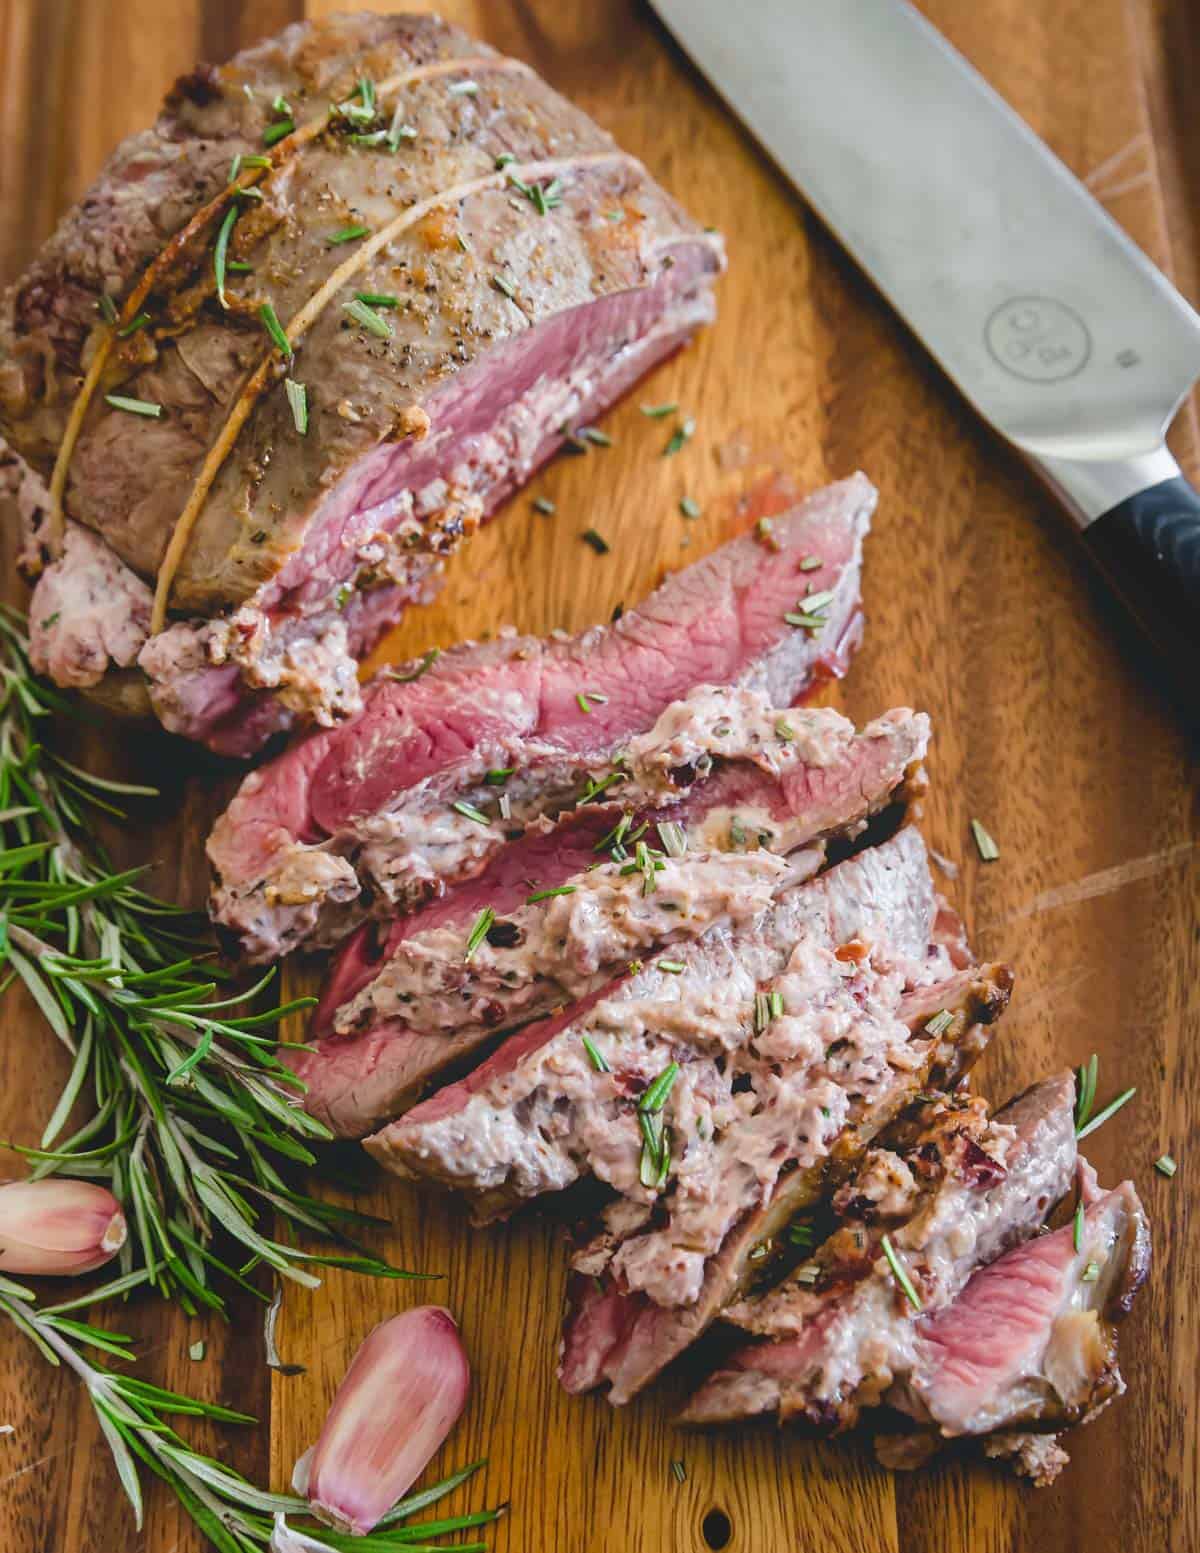 Try this easy butterflied leg of lamb recipe with cranberry goat cheese stuffing for a simple yet elegant holiday meal.